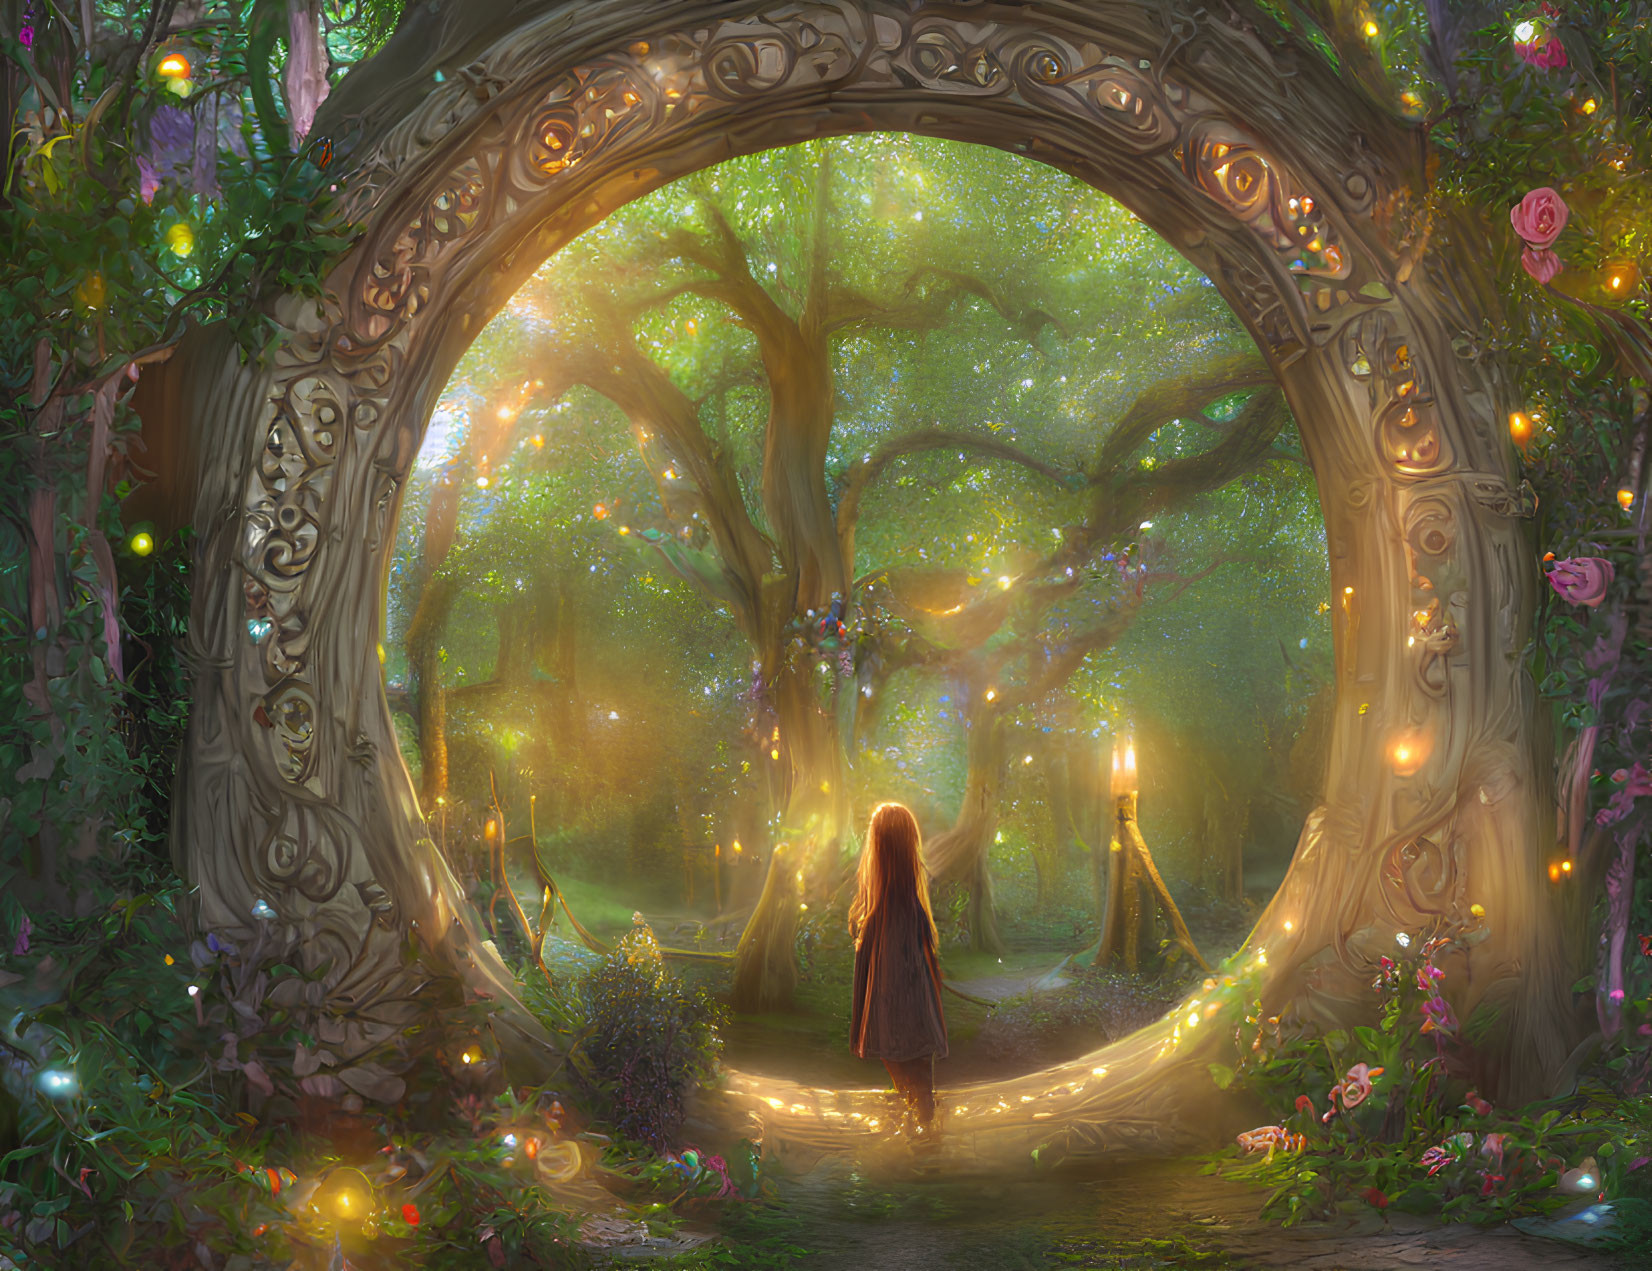 Enchanted forest gateway with ethereal light and fireflies